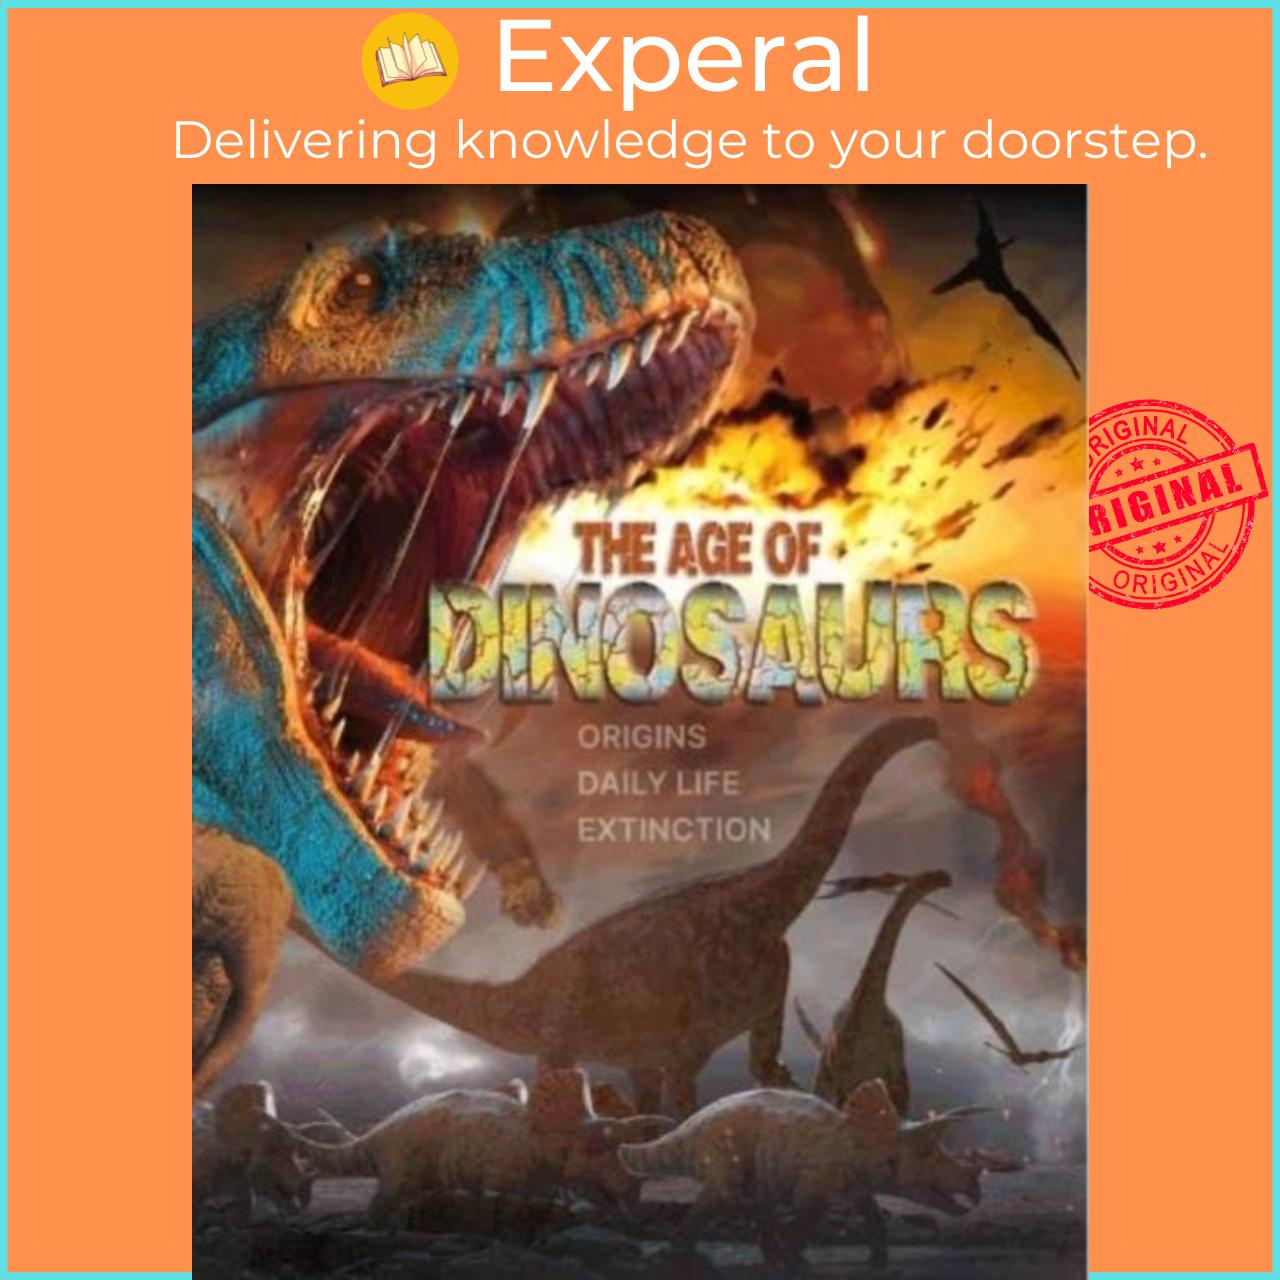 Sách - The Age of Dinosaurs - Origins, Daily Life, Extinction by Lisa Regan (UK edition, hardcover)